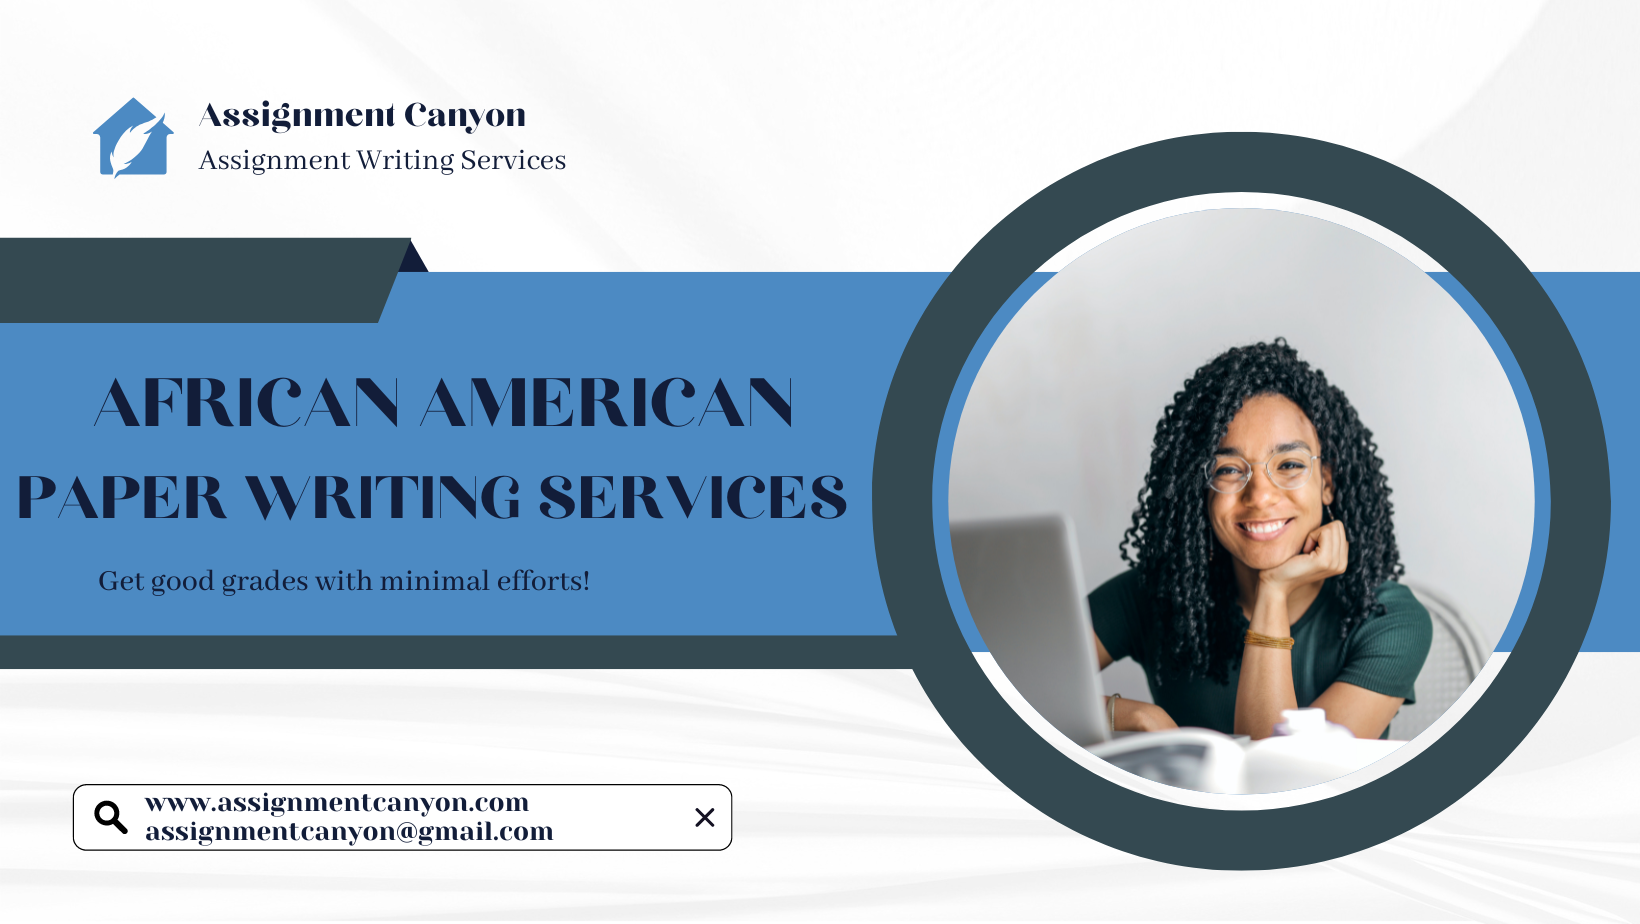 Hire A Tutor To Do Your African American History Papers From Assignment Canyon at Affordable Rates 